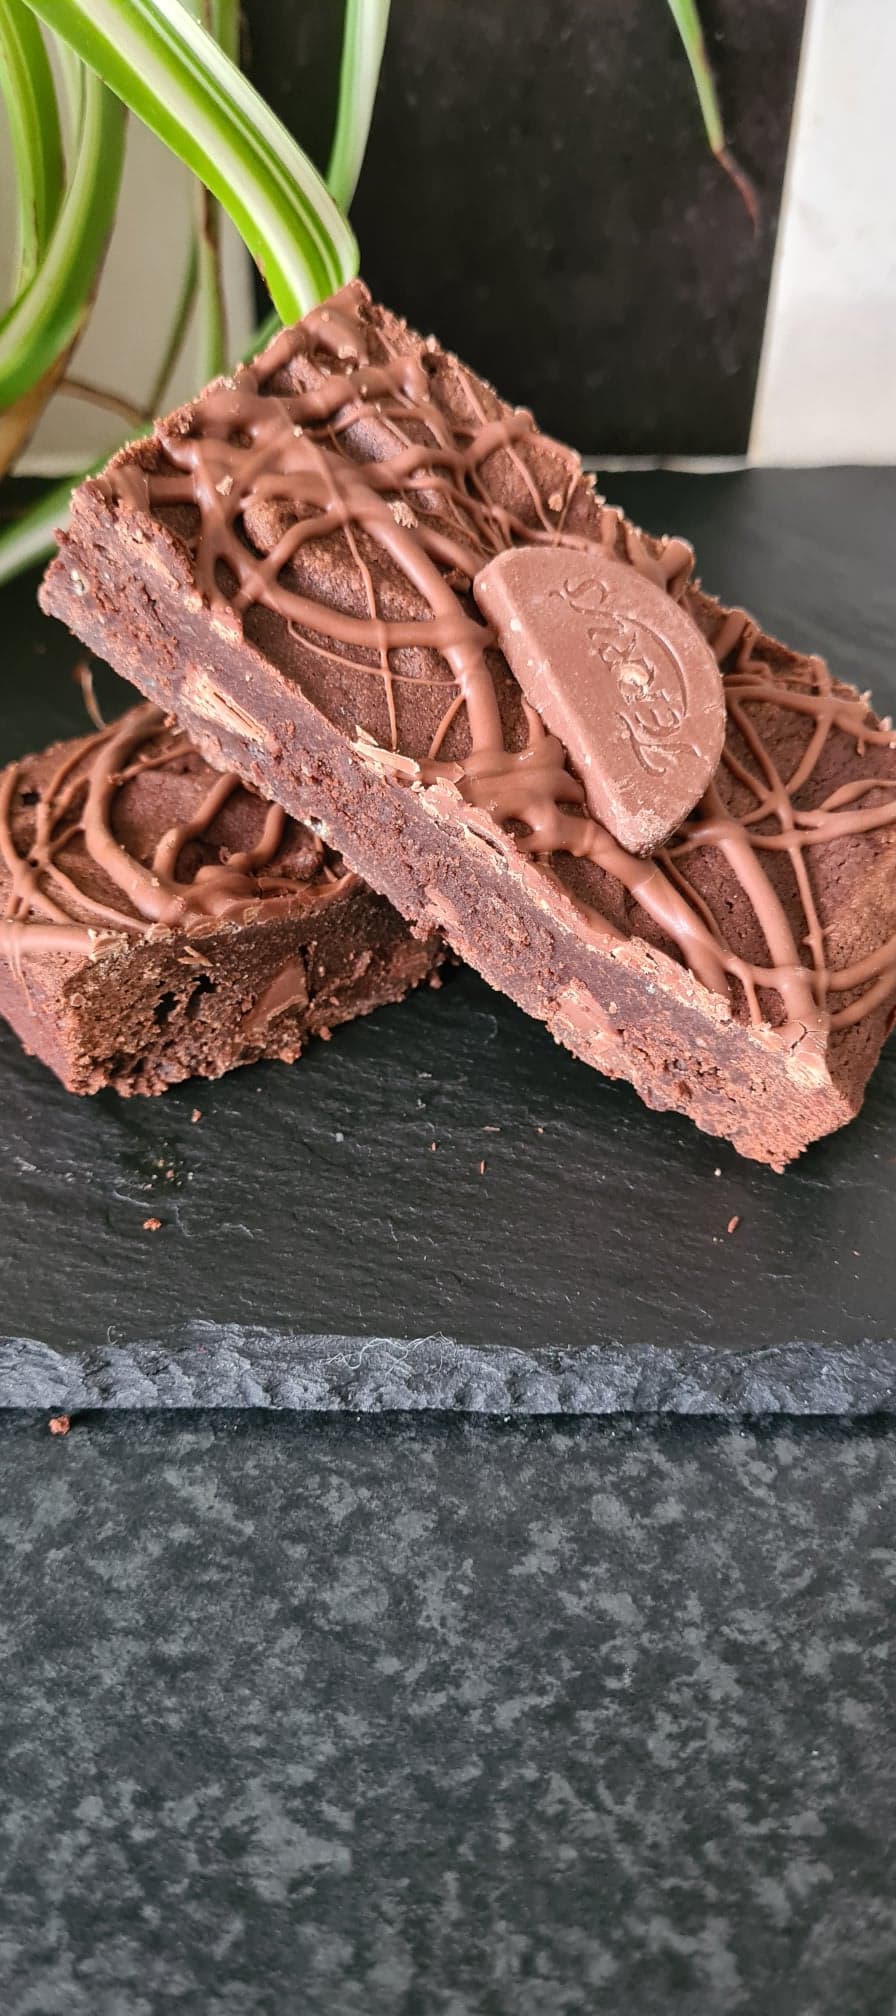 Terry chocolate orange brownie. A match truly made in heaven!